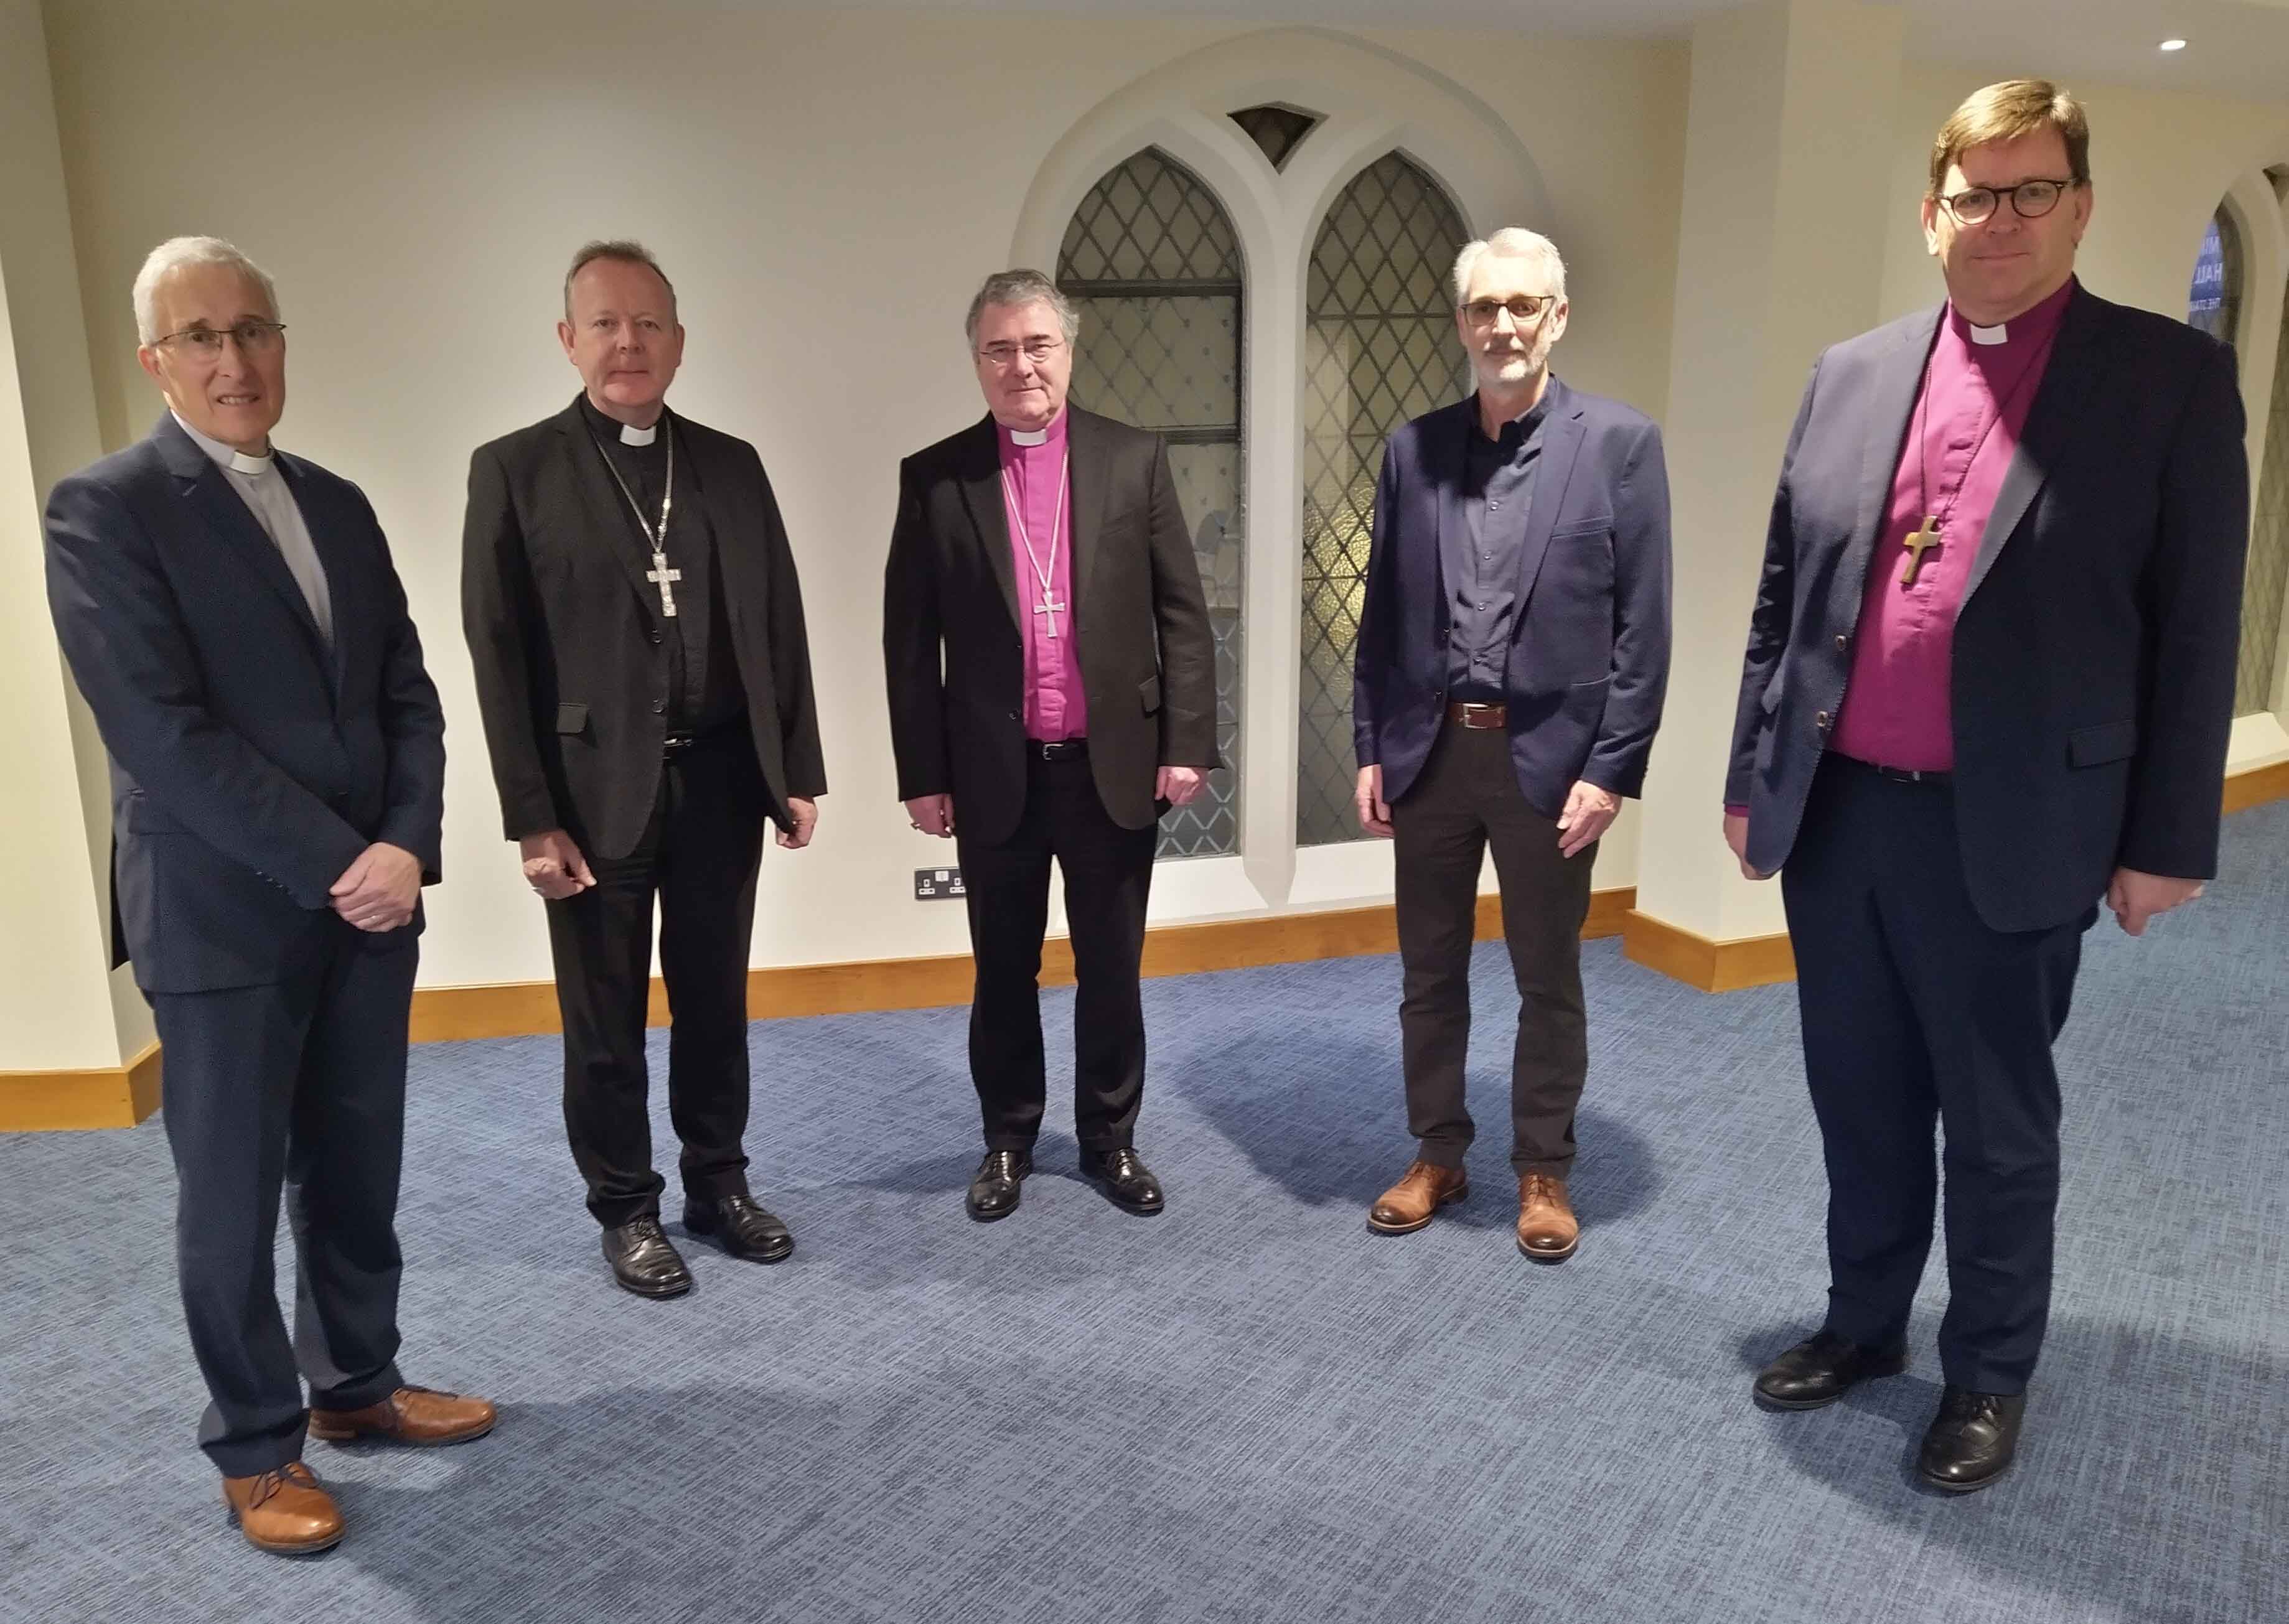 From left: the Rt Revd Dr John Kirkpatrick, Moderator of the General Assembly of the Presbyterian Church in Ireland; Archbishop Eamon Martin, Roman Catholic Archbishop of Armagh and Primate of All Ireland; Archbishop John McDowell, Church of Ireland Archbishop of Armagh and Primate of All Ireland; the Reverend David Nixon, President of the Methodist Church in Ireland; and the Rt Revd Andrew Forster, President of the Irish Council of Churches.